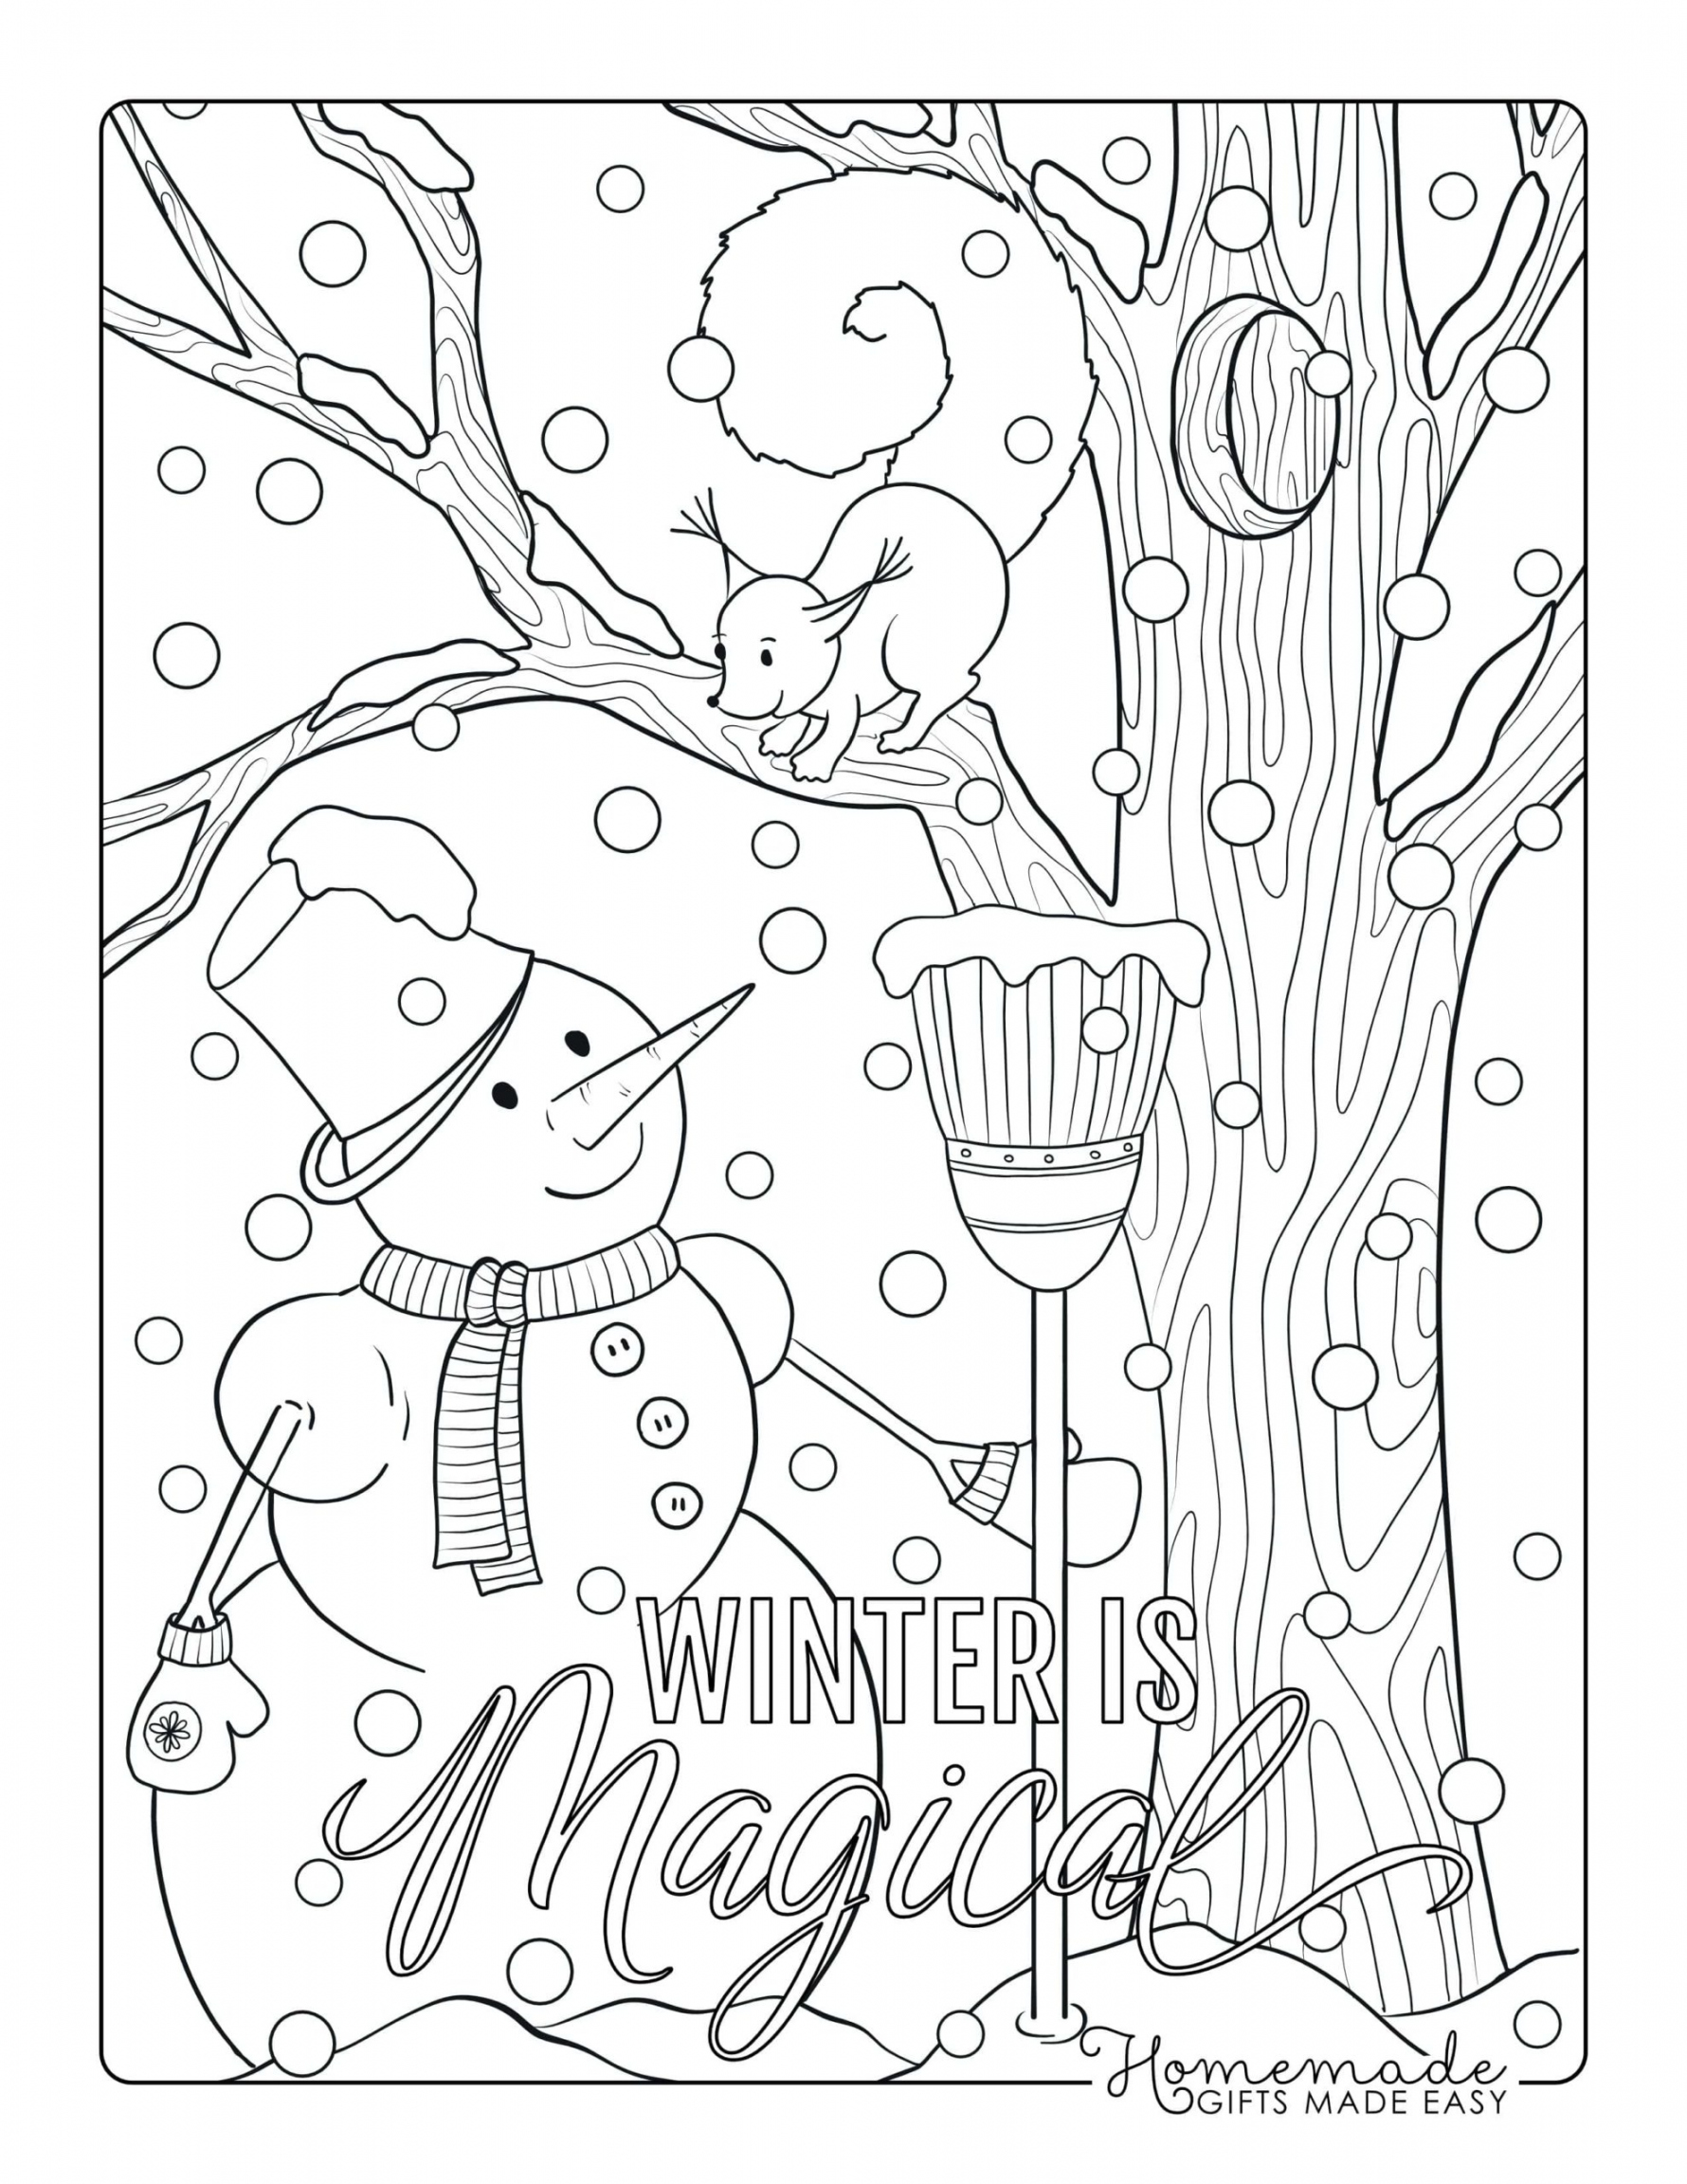 Free Printable Winter Coloring Pages - Printable -  Free Winter Coloring Pages for Adults - Happier Human